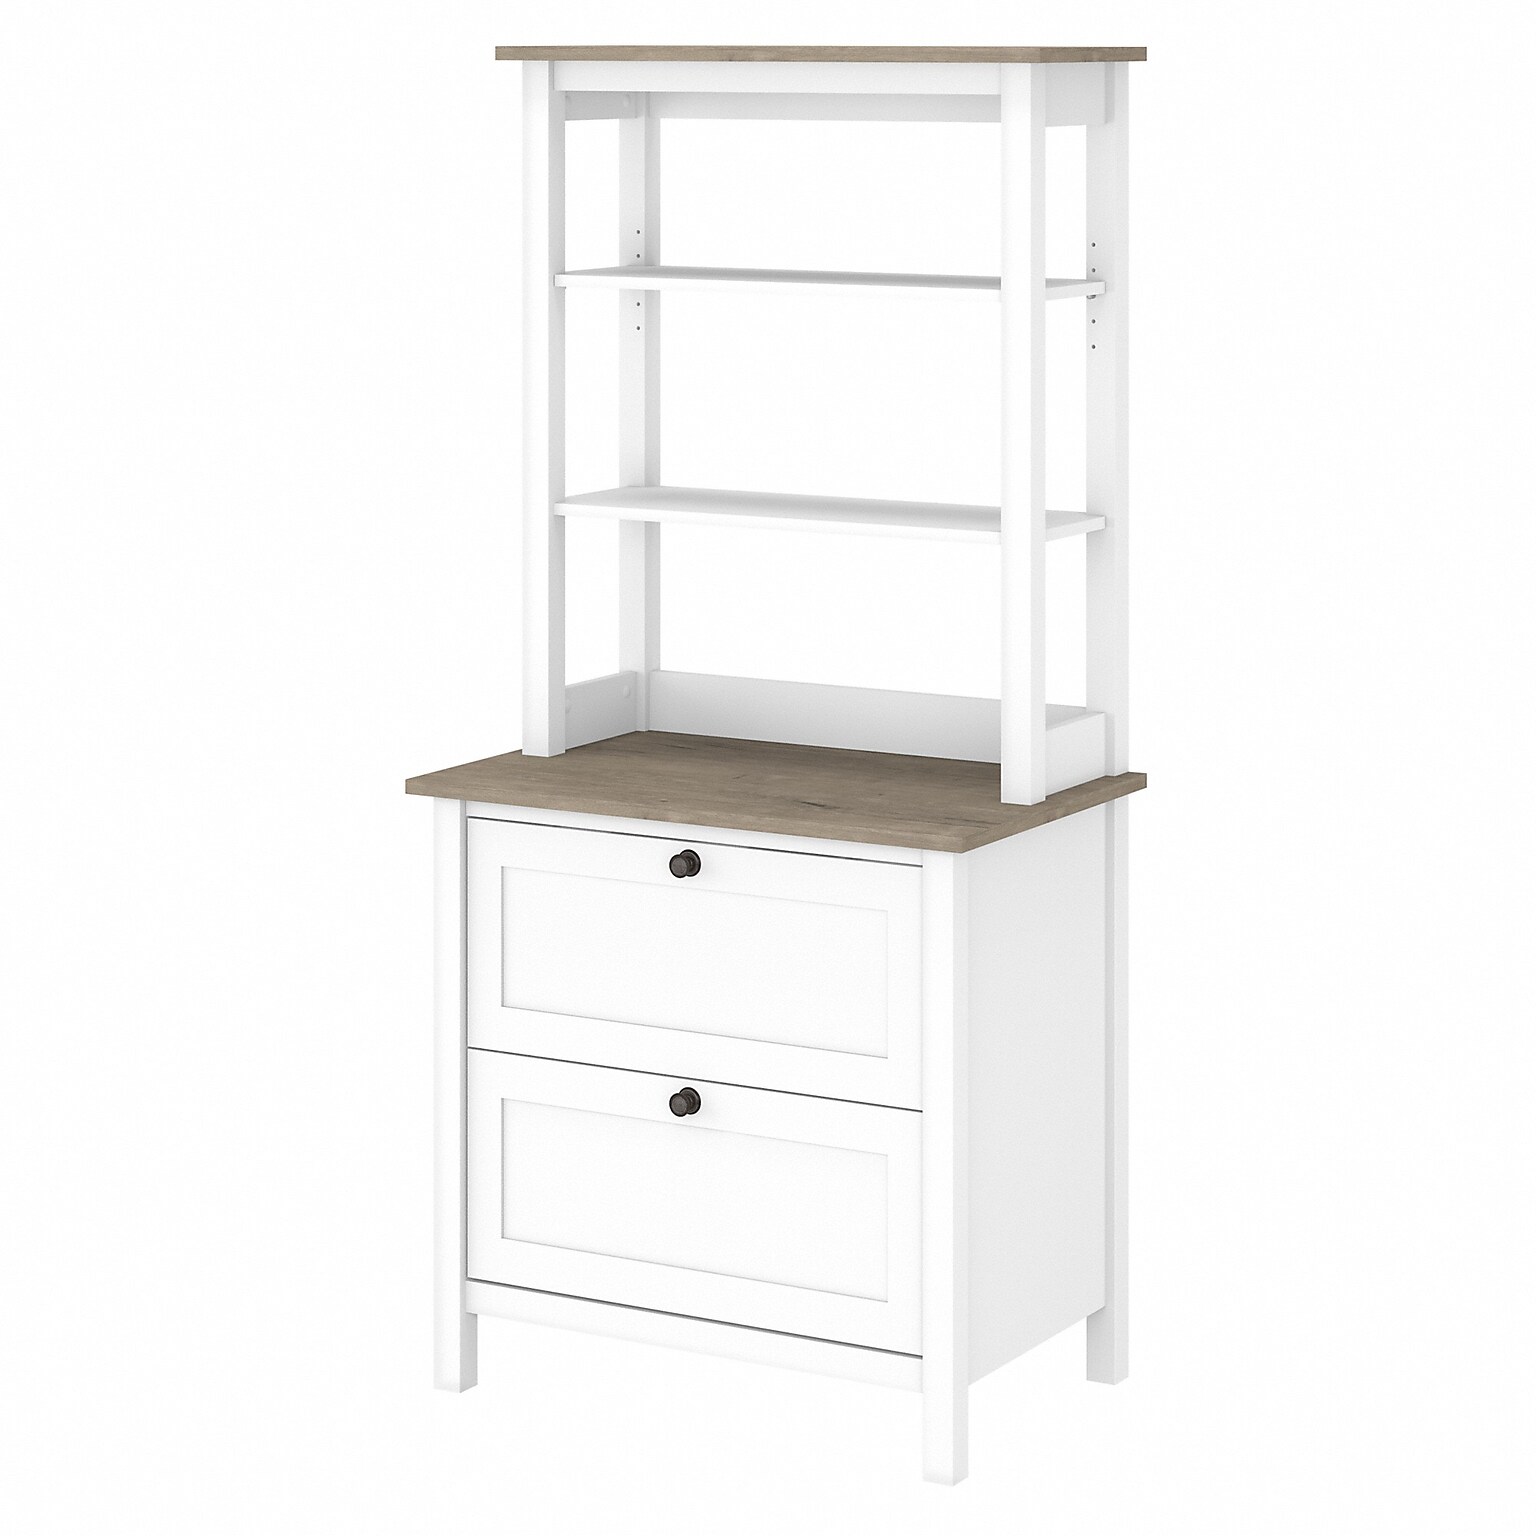 Bush Mayfield 66 2-Shelf Standard Bookcase with Drawers and Adjustable Shelf, Pure White/Shiplap Gray (MAY018GW2)